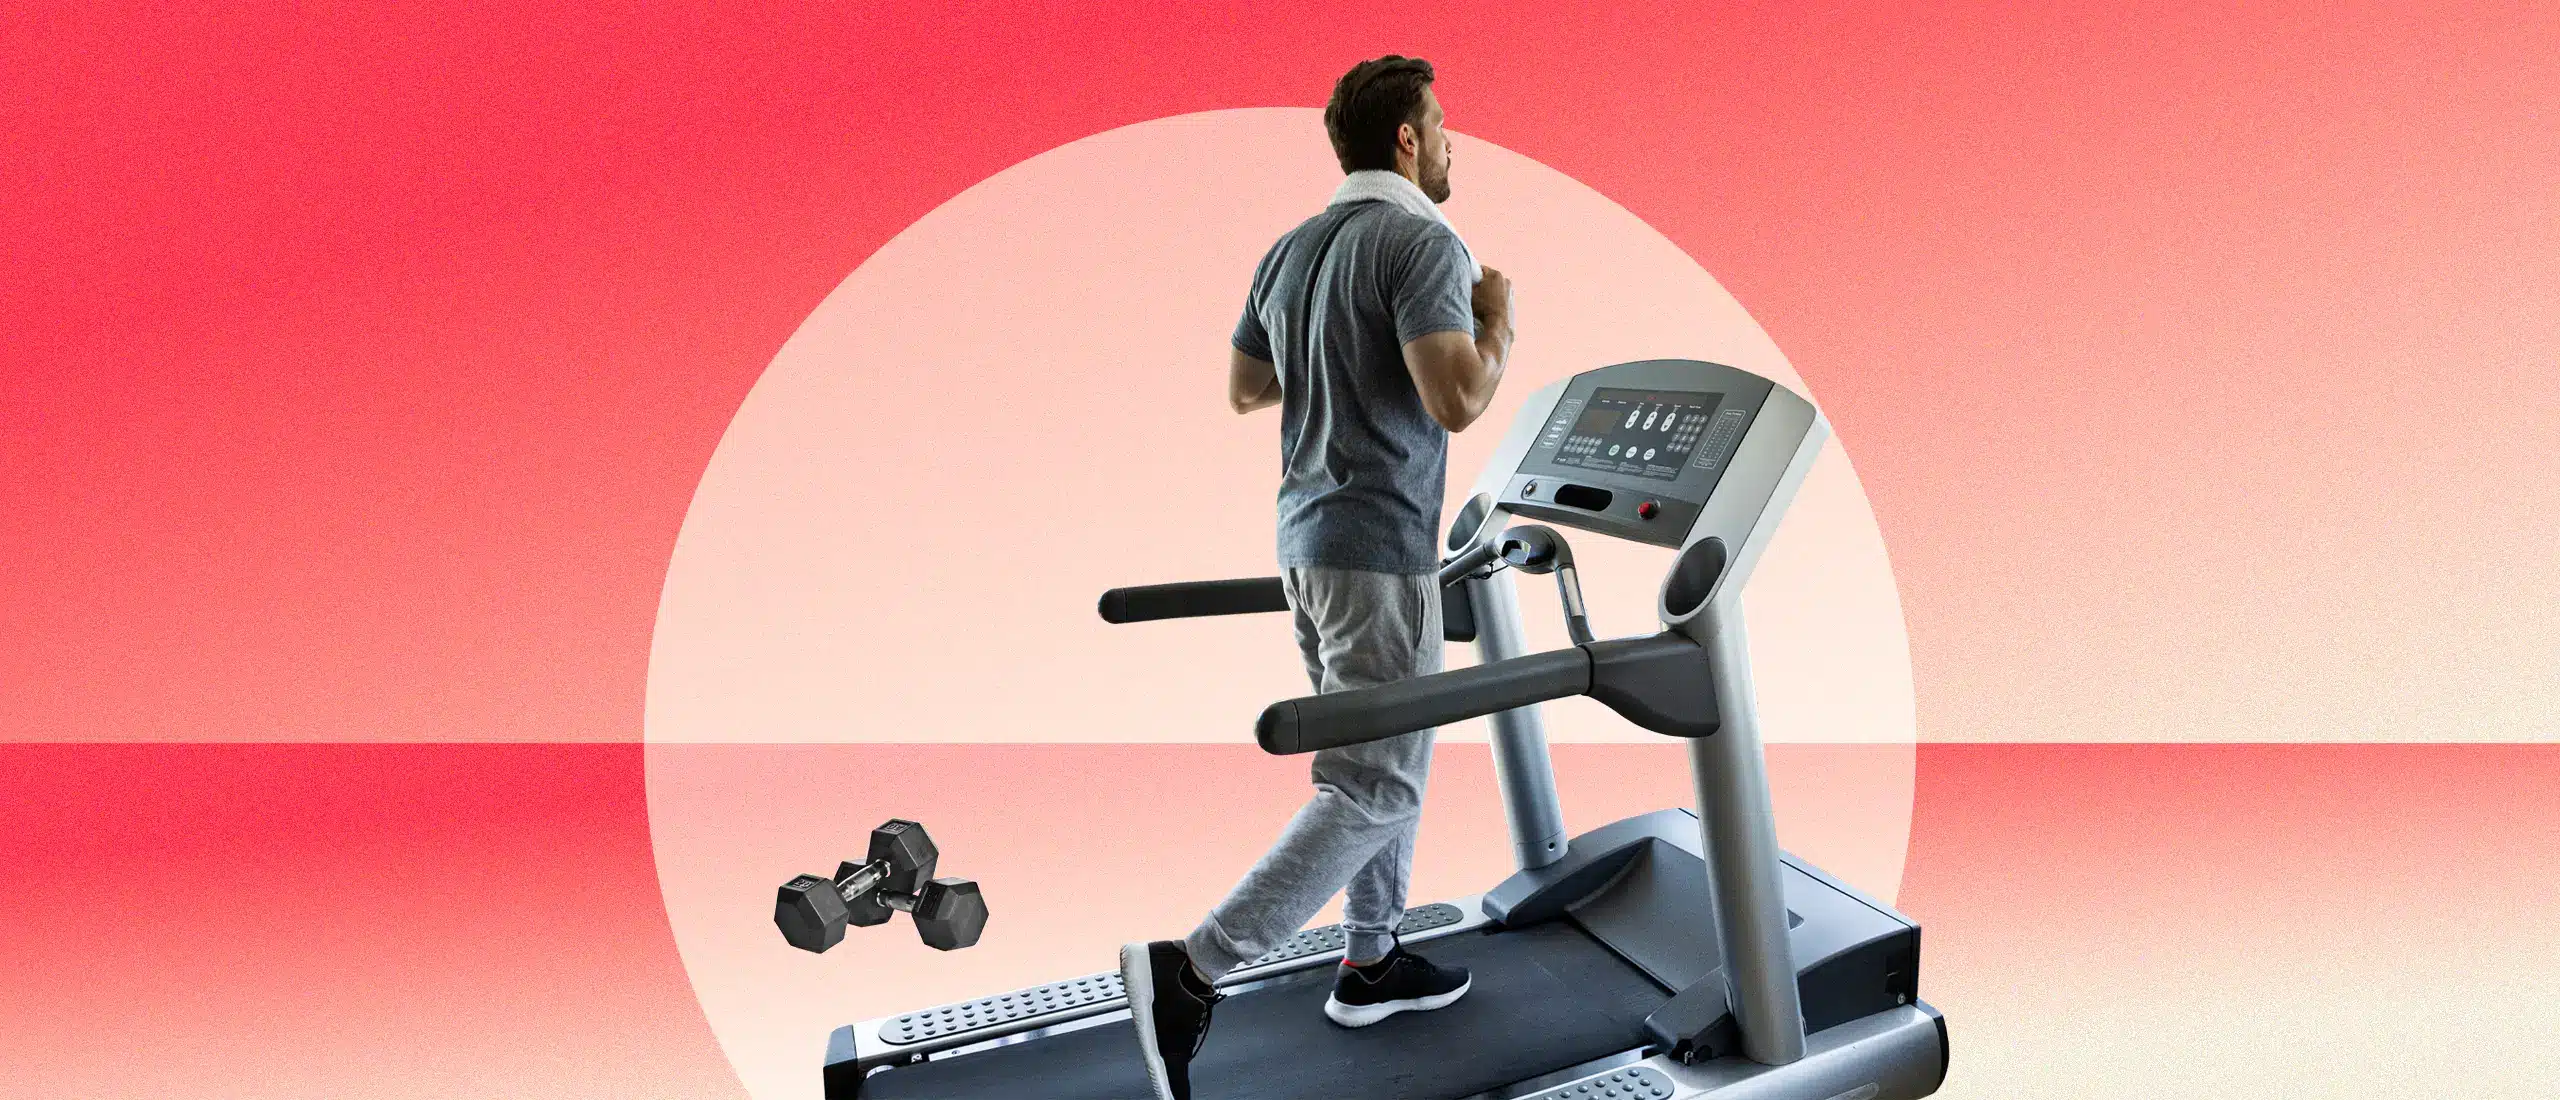 Man surrounded by a halo on a treadmill with weights on the floor on a red background